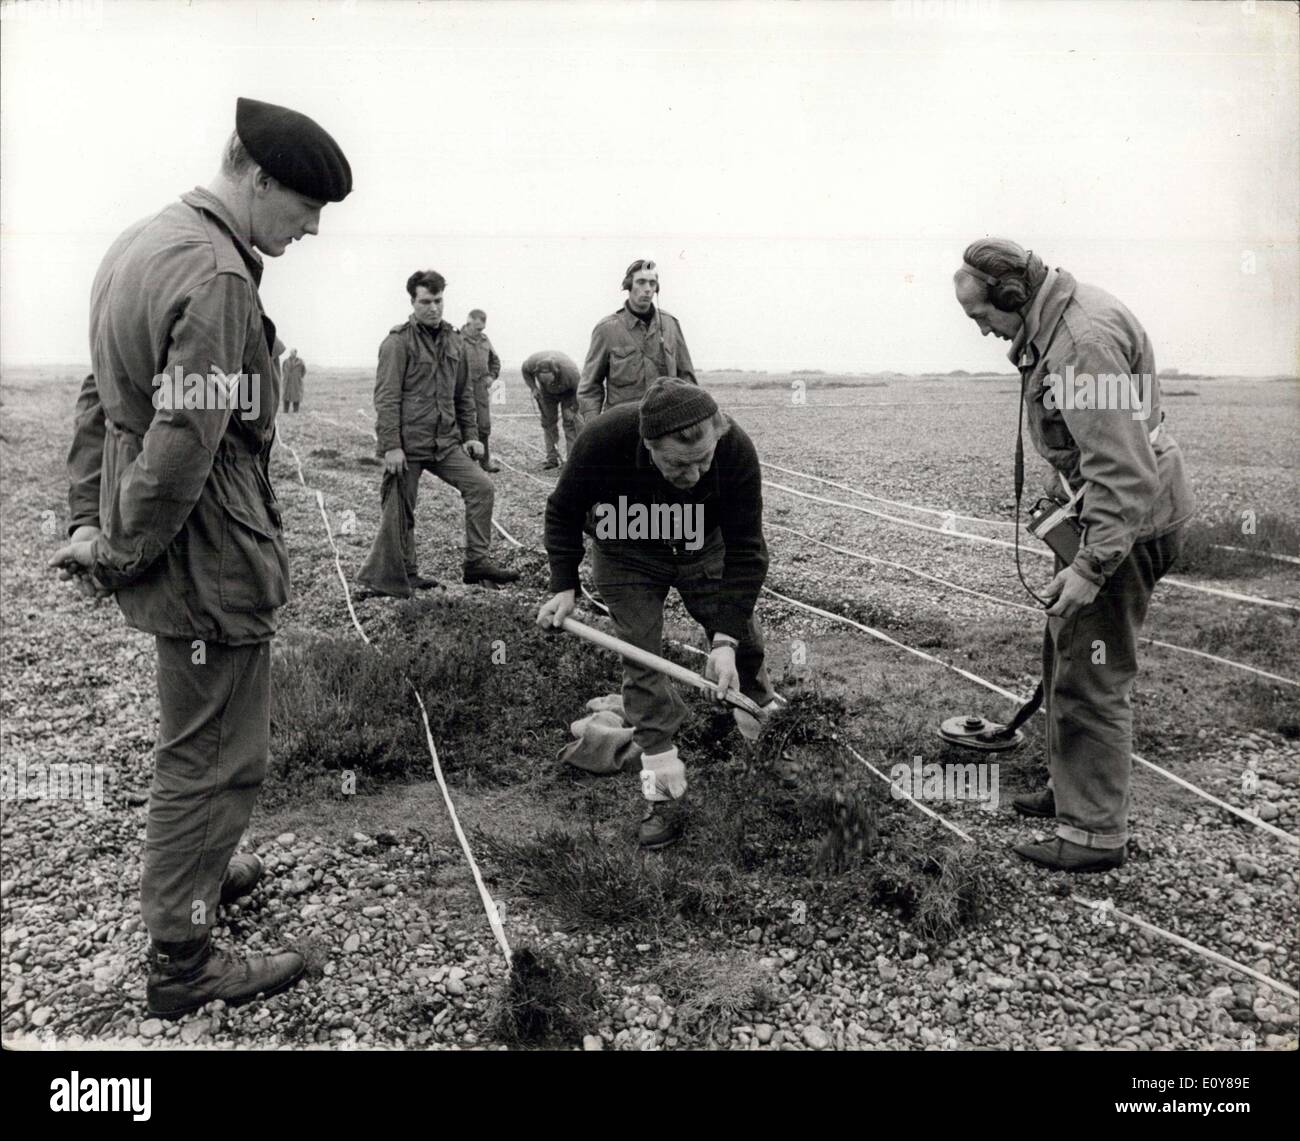 Jan. 27, 1969 - Ex-P.O.W.'s ''De-Fuse' Bird Sanctuary: Former prisoners of war, from Germany and the Ukraine, are helping to make a Kentish beach free from the dangerous relics of war training. Denge Beach, near Lydd, is to be a bird sanctuary when all the material of war is discovered and destroyed. Under the supervision of N.C.O.'s of the Royal Engineers Bomb Disposal Unit, they are going yard by yard over taped sections of the foreshore, recovering dangerous eroded shells and mortar bombs Stock Photo